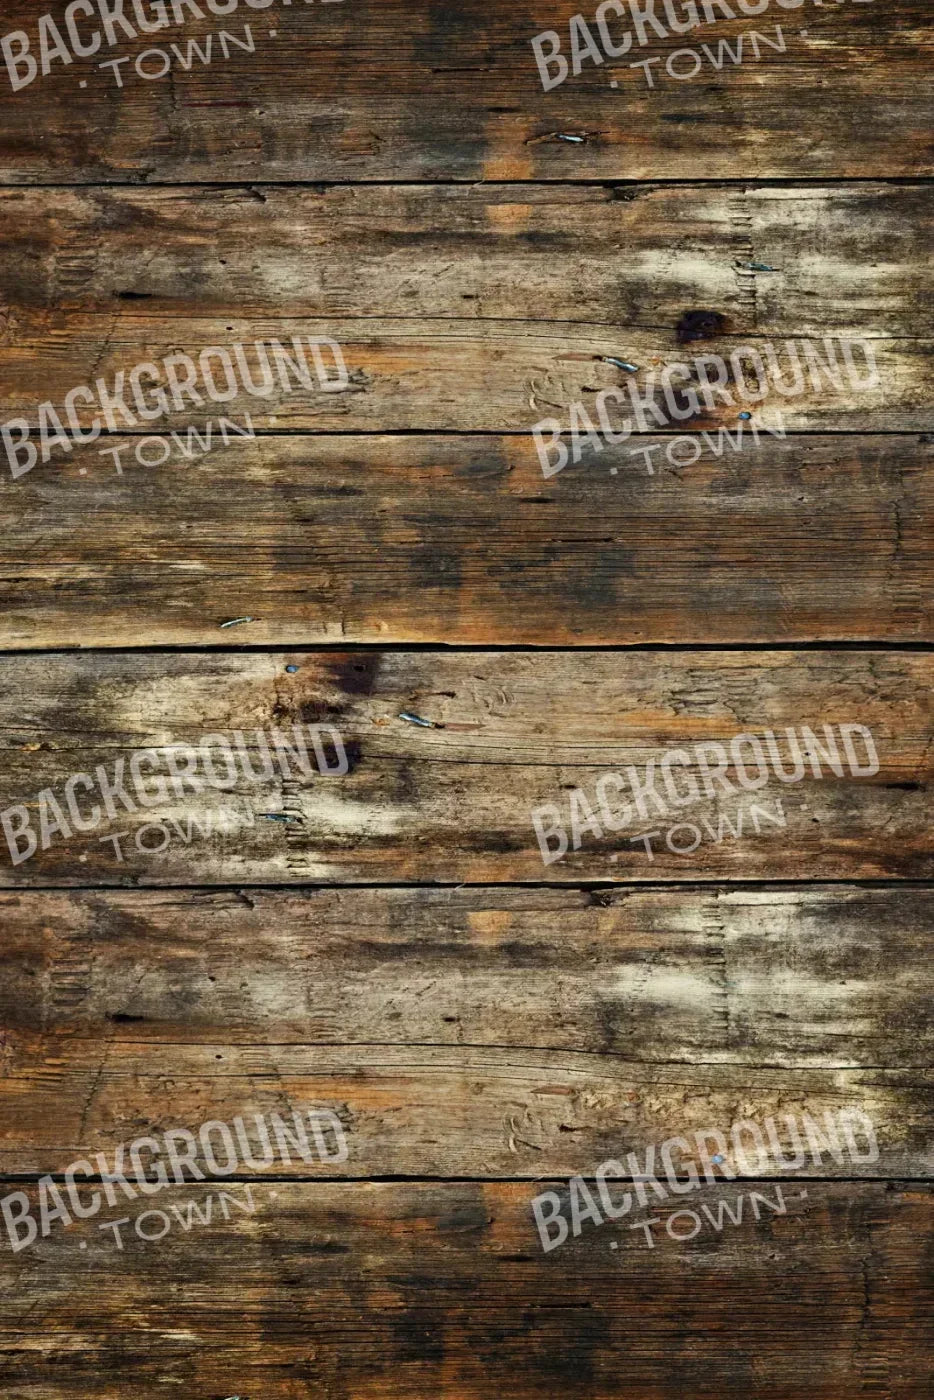 Antique Wooden Floor Warm For Lvl Up Backdrop System 5X76 Up ( 60 X 90 Inch )